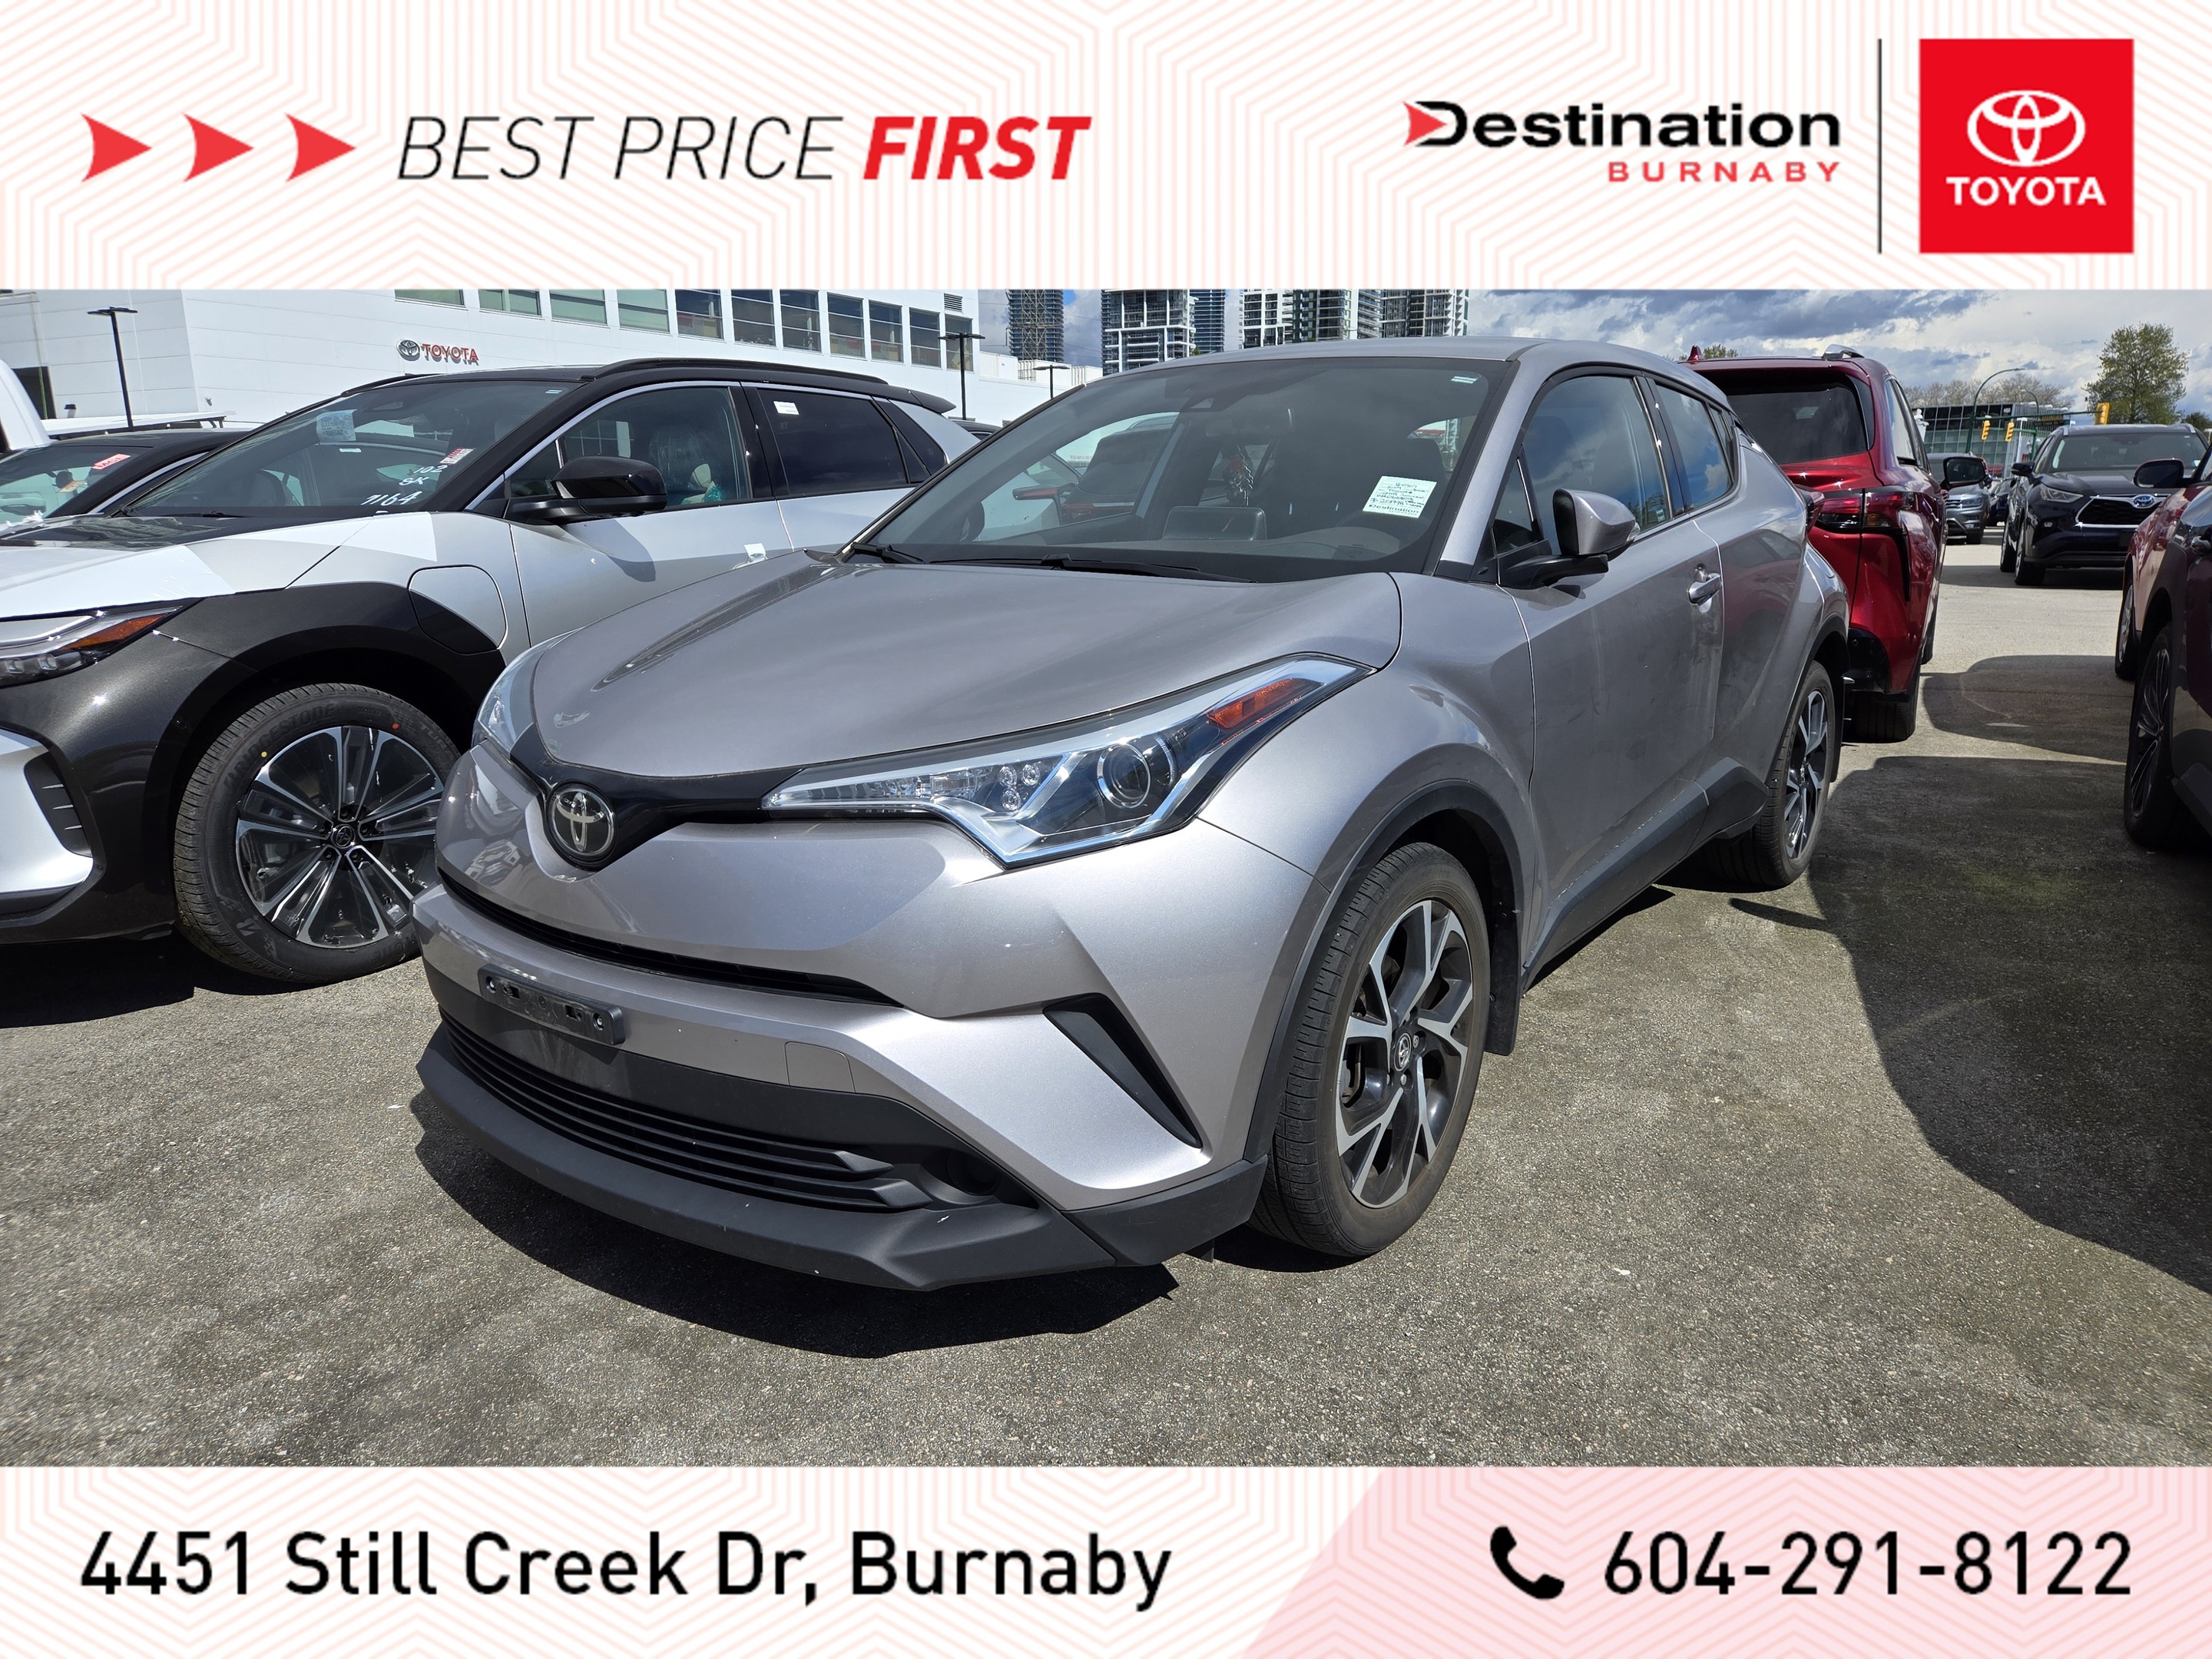 2019 Toyota C-HR Limited - Local BC Car, Fully Loaded, Low KMS!